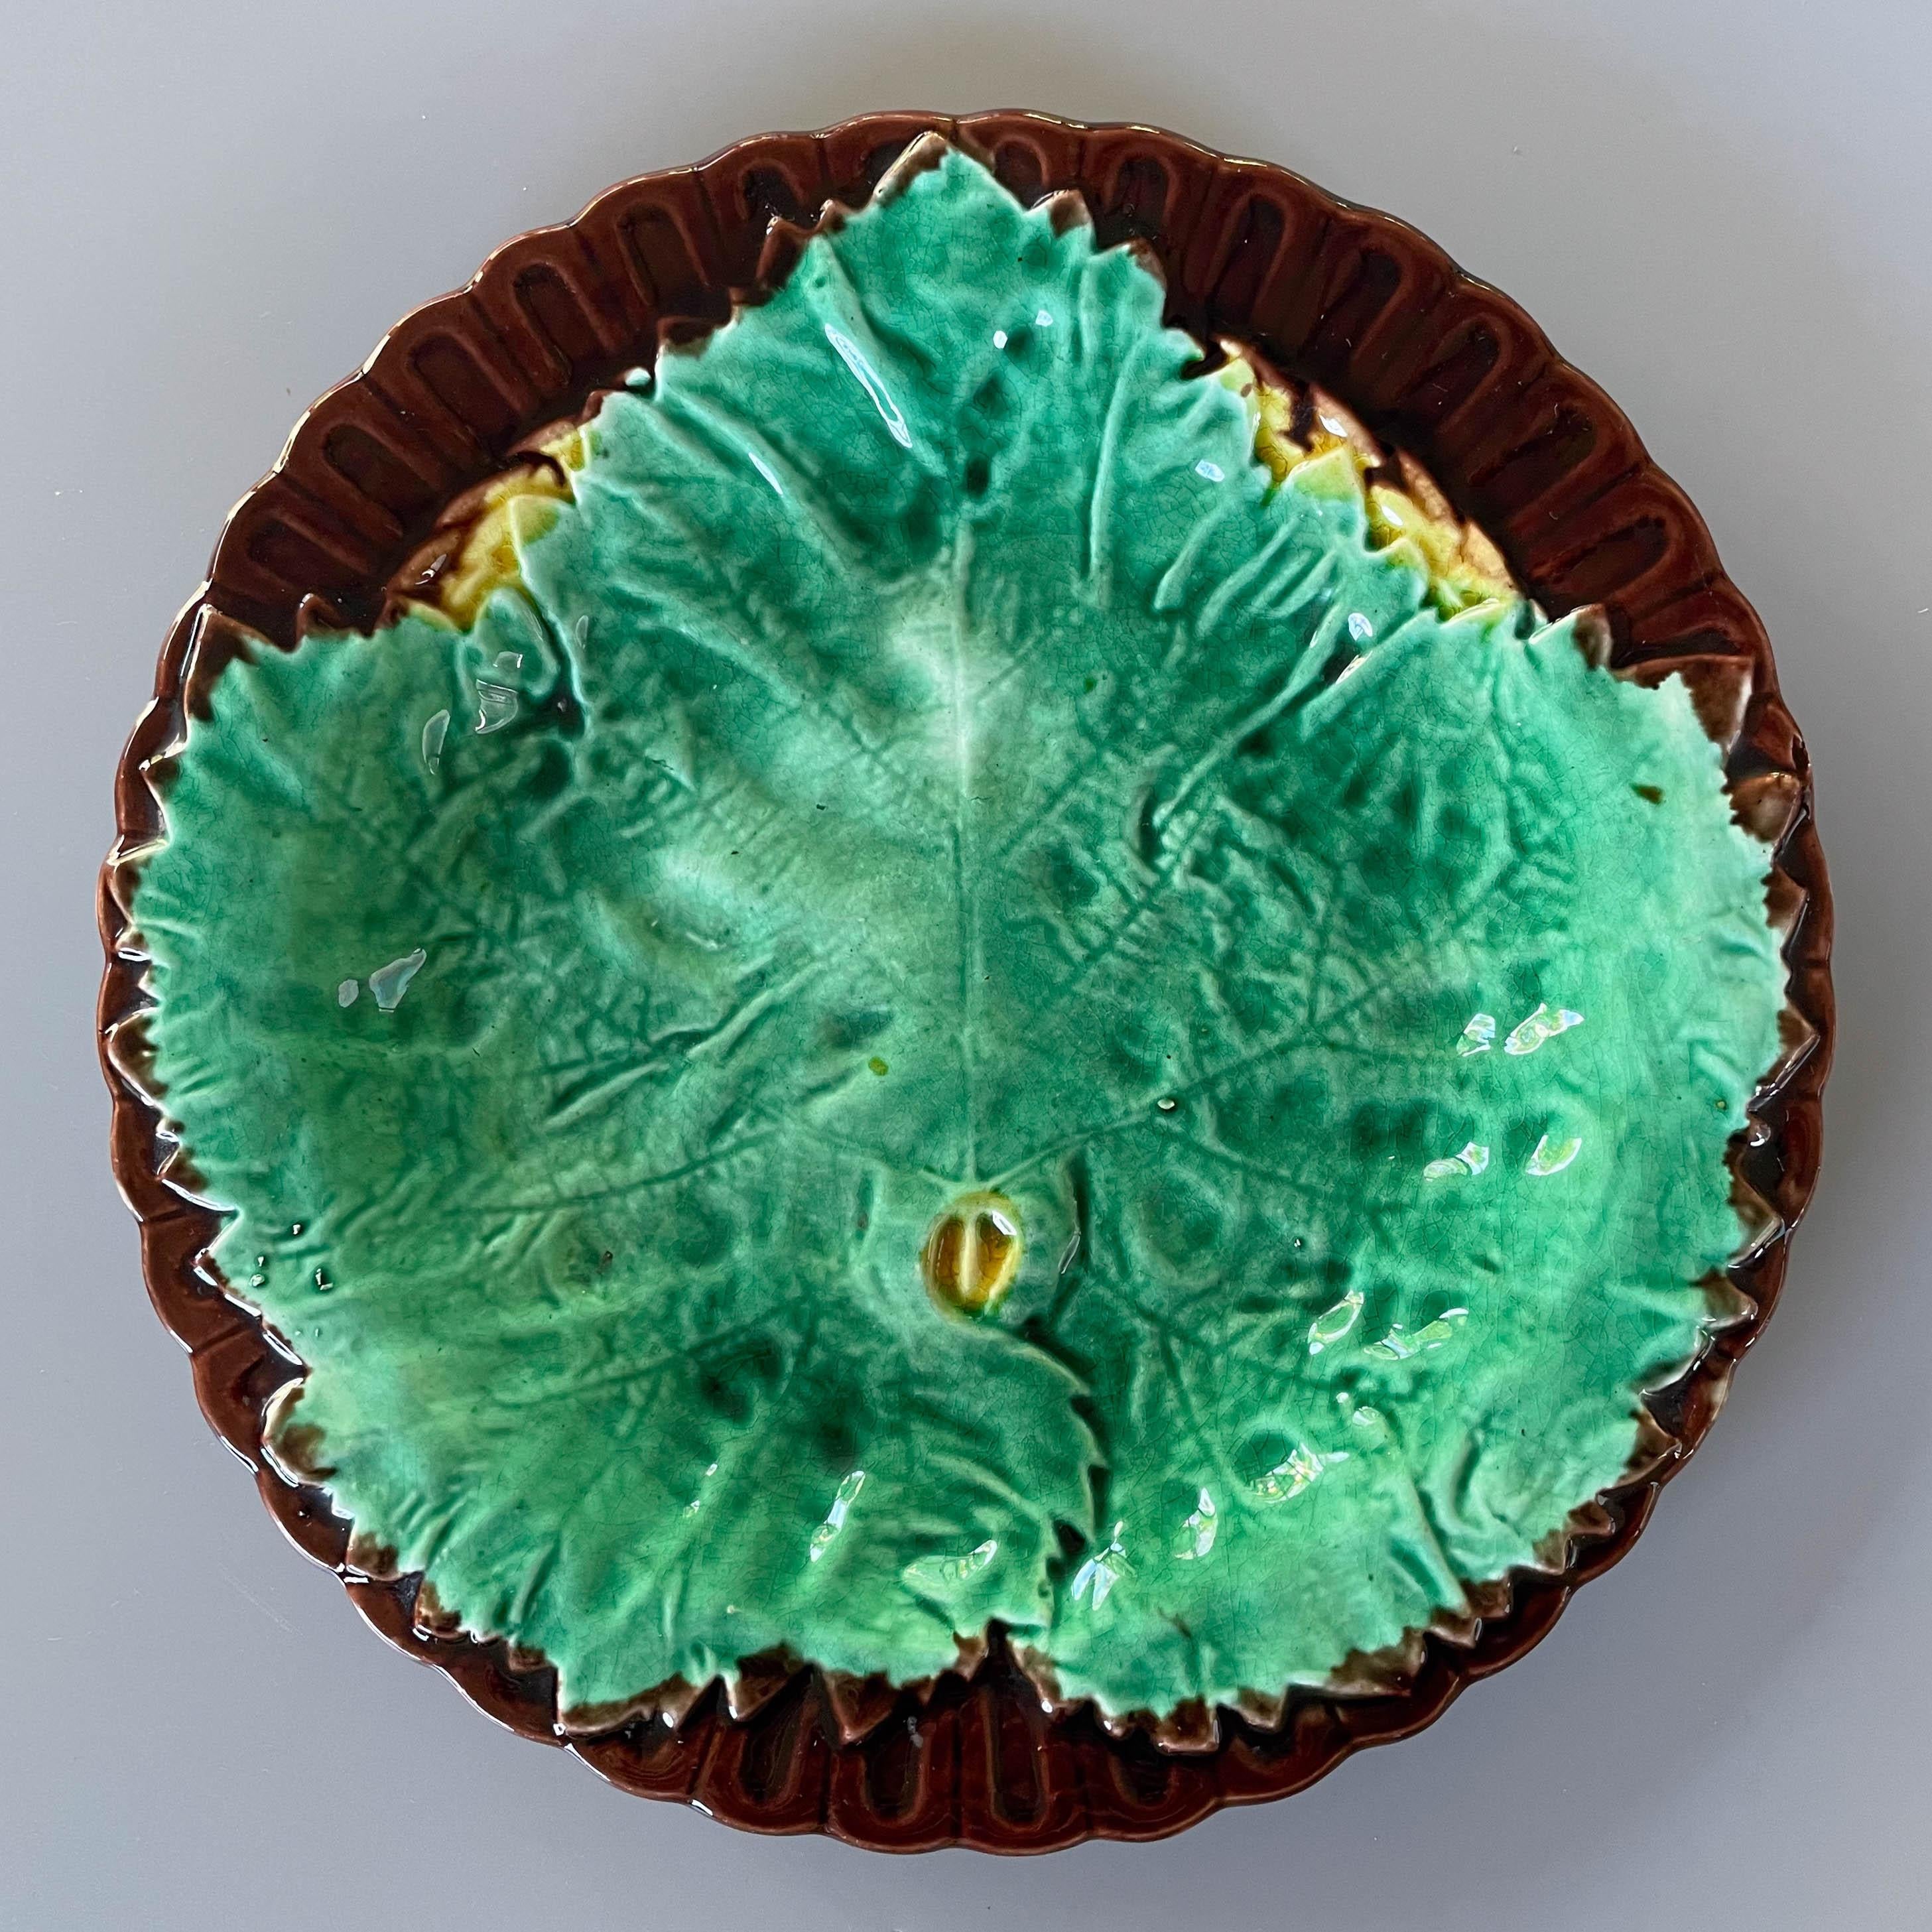 A 19th Century English Majolica glazed ceramic begonia leaf plate with a single green leaf on dark brown ground with yellow accents. Mottled green, brown and yellow on reverse. Circa 1880-1900.
8.5